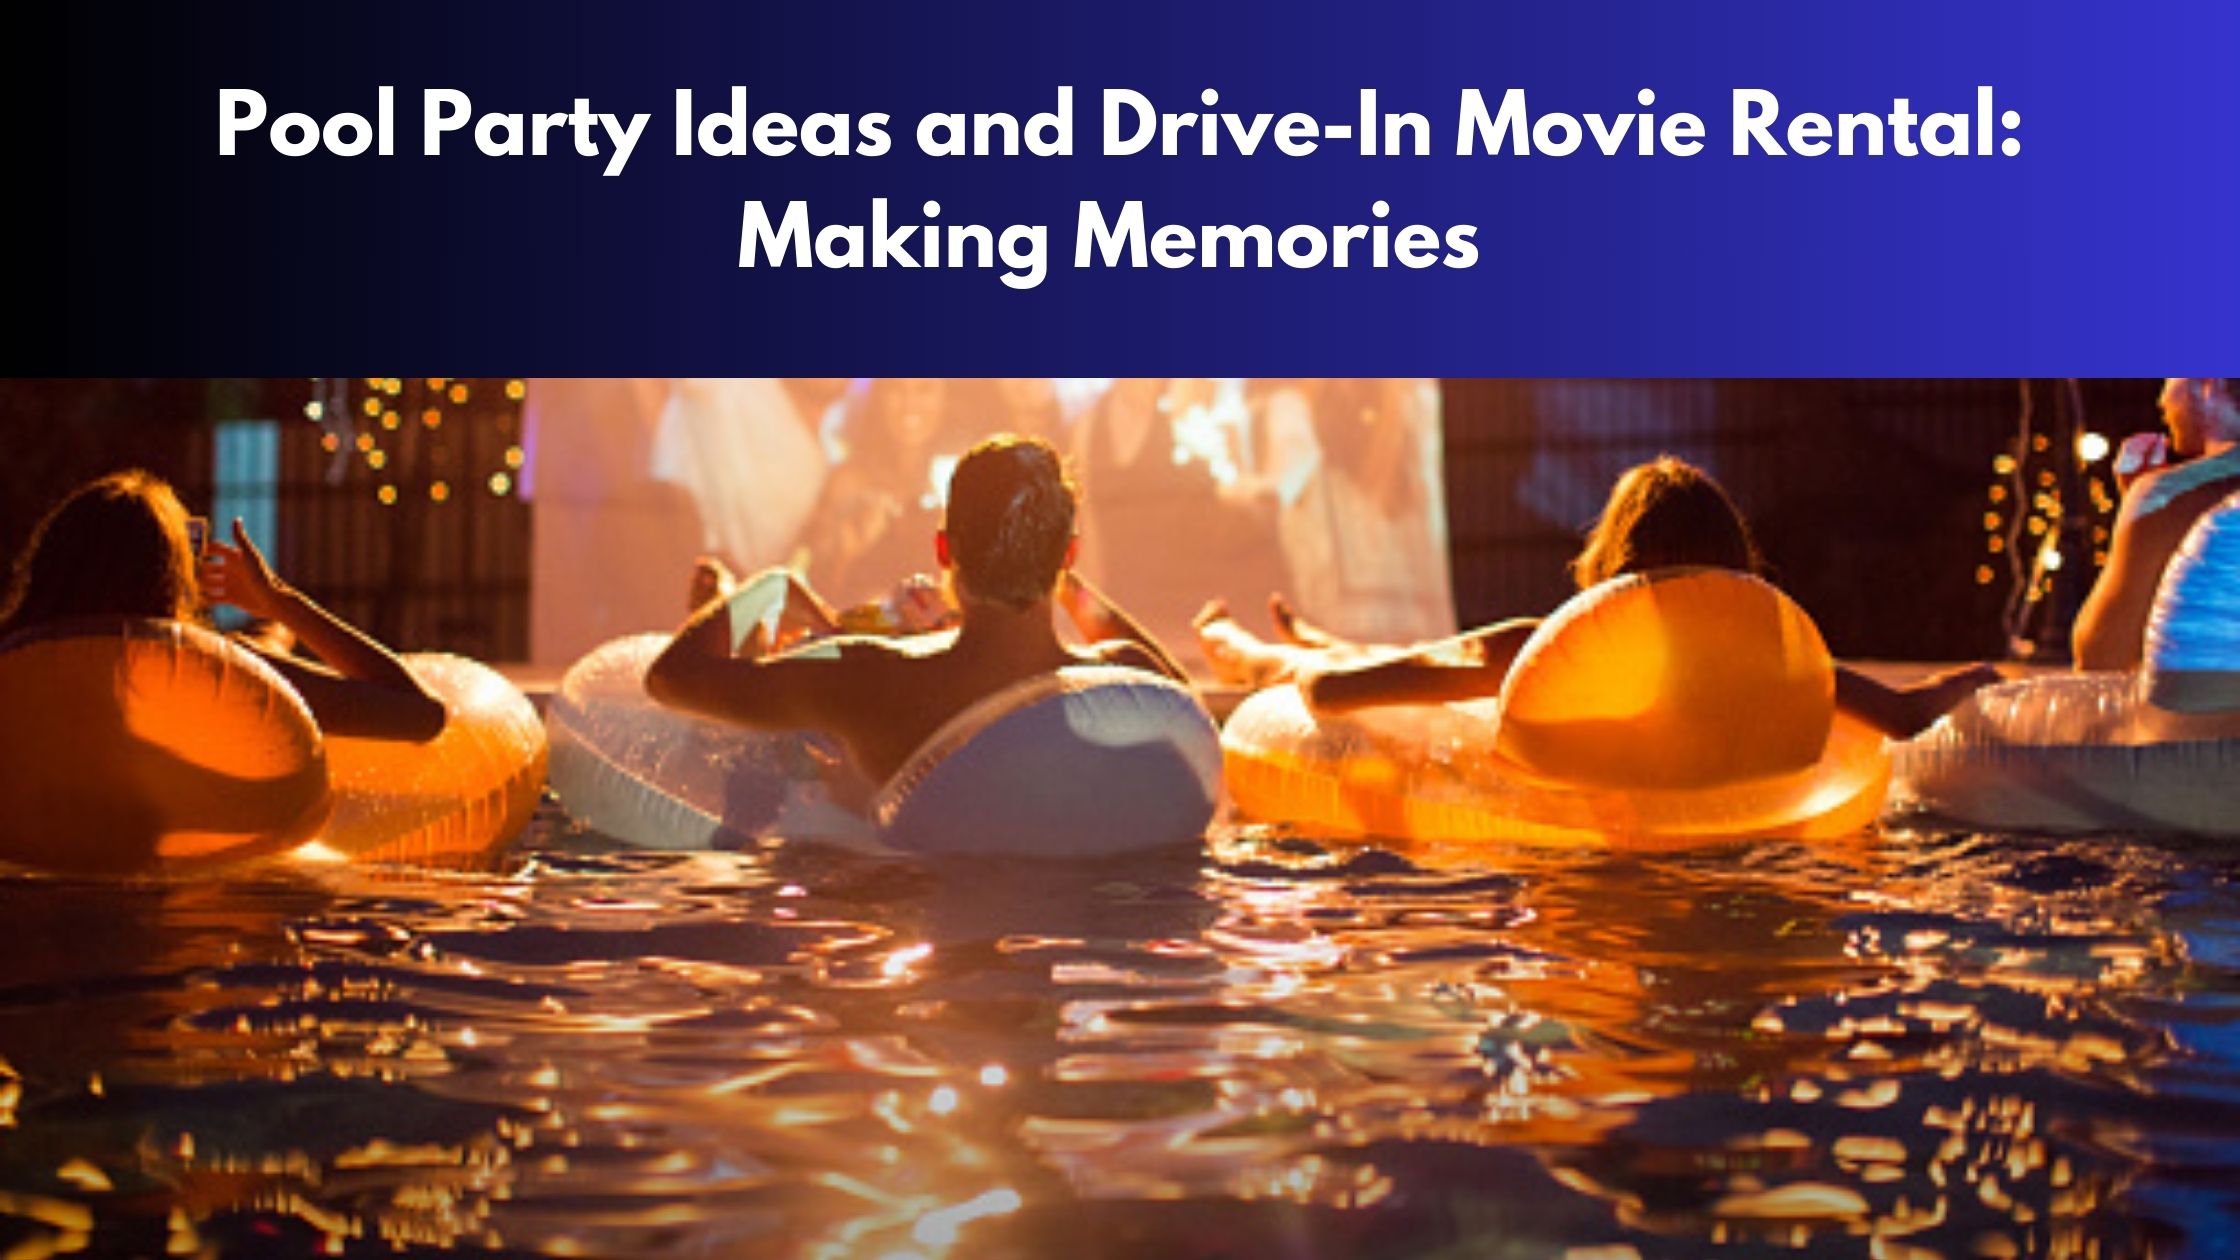 Pool Party Ideas and Drive-In Movie Rental: Making Memories